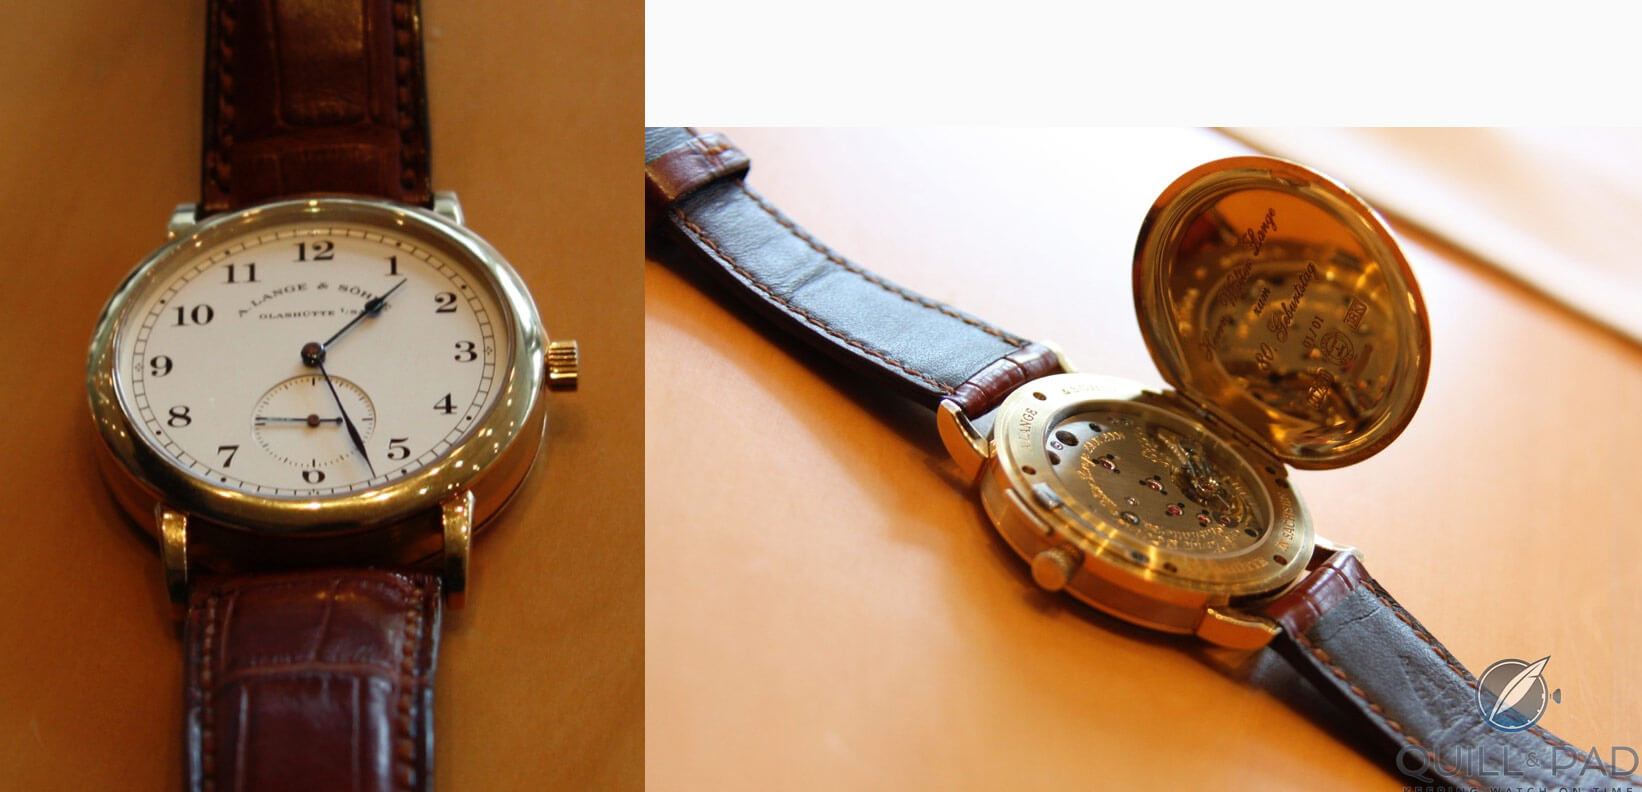 Watch presented to Walter Lange by Lange colleagues on his 80th birthday